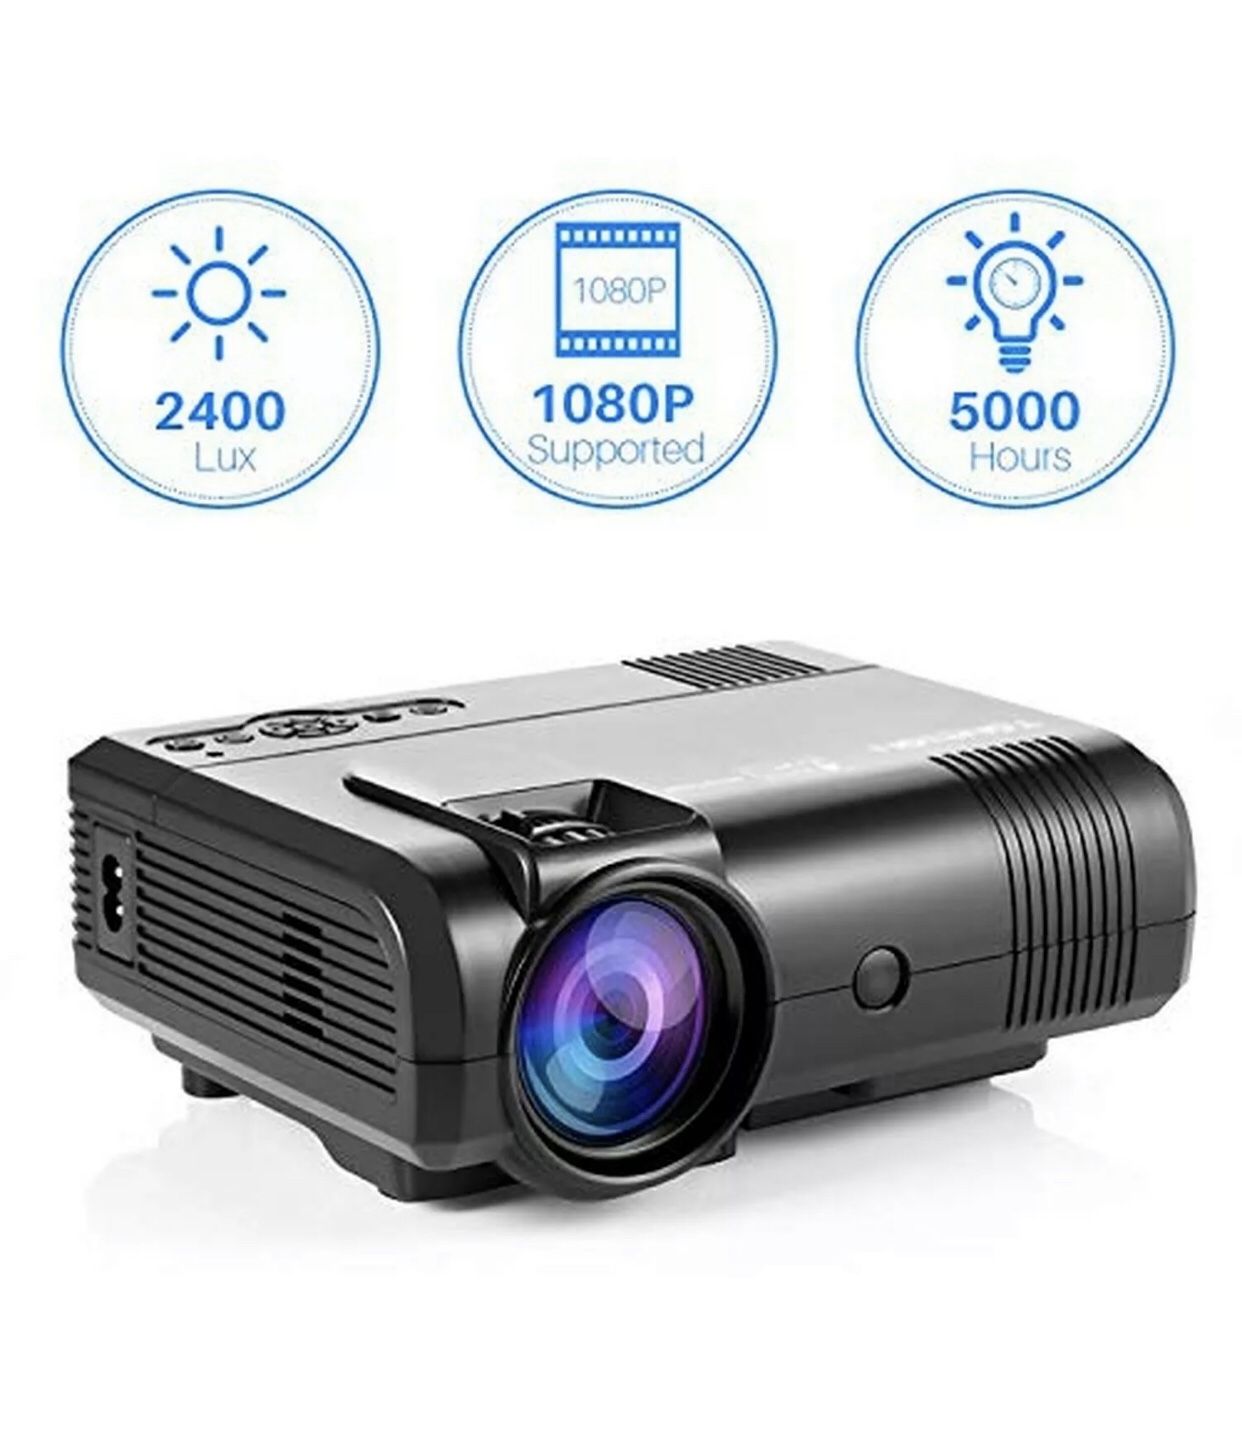 Tontion 2400 Lux Video Projector supporting 1080P -50,000 Hour LED Full HD Mini Projector, Compatible with Fire TV Stick, smartphones, HDMI, VGA, US